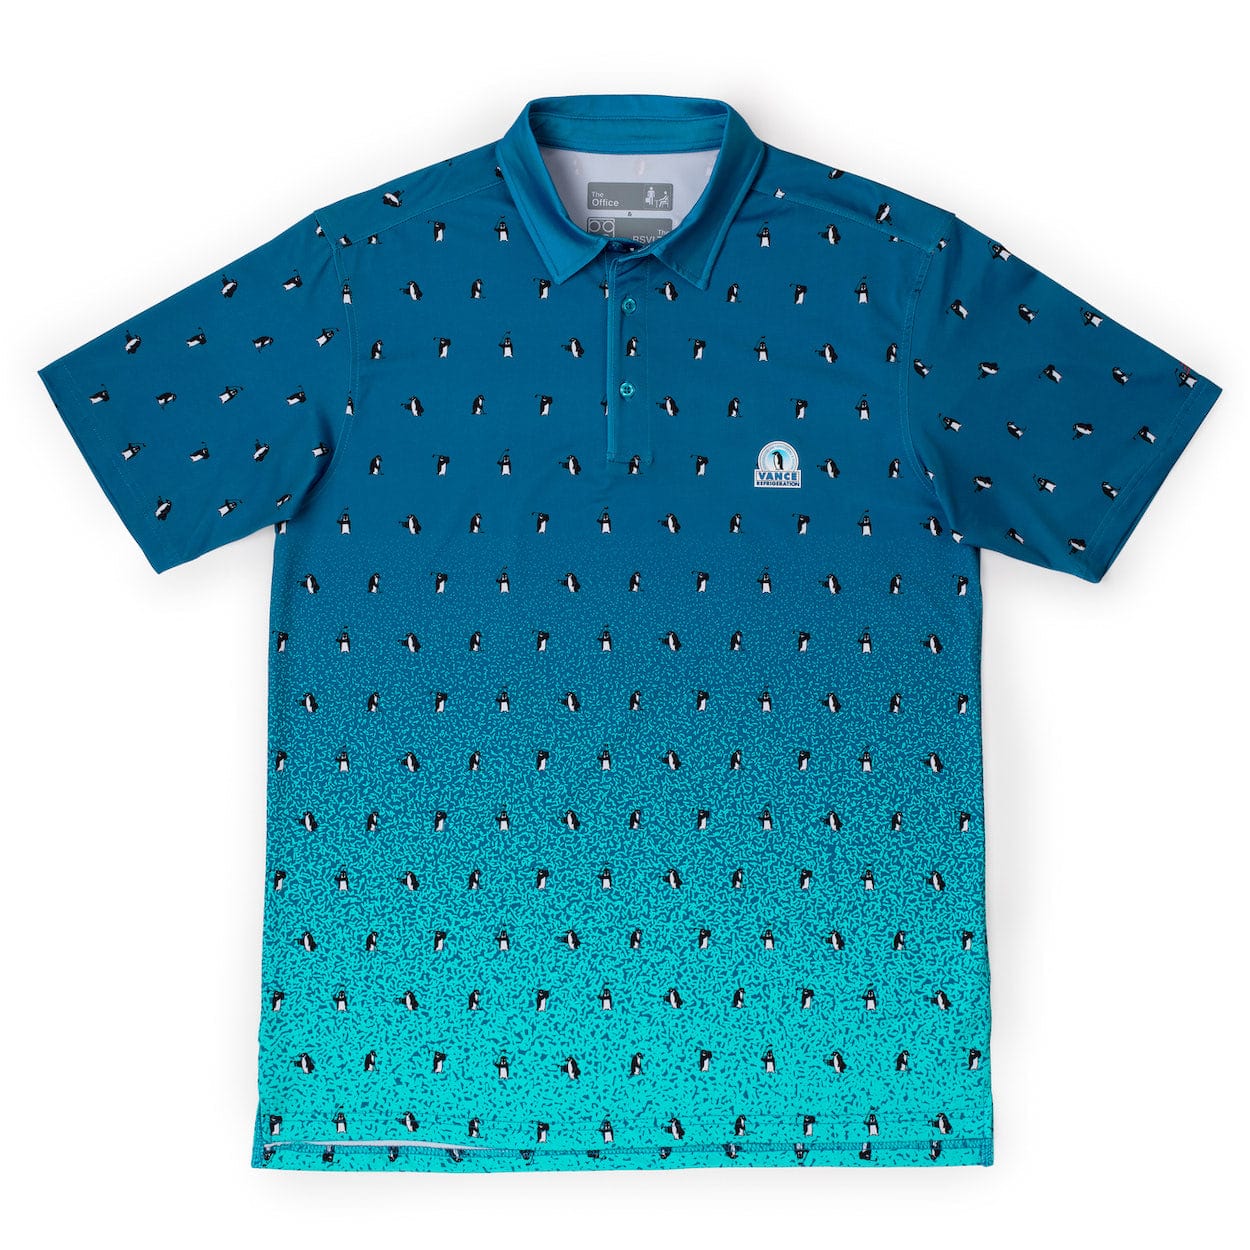 The Office Vance Refrigeration – All-Day Polo